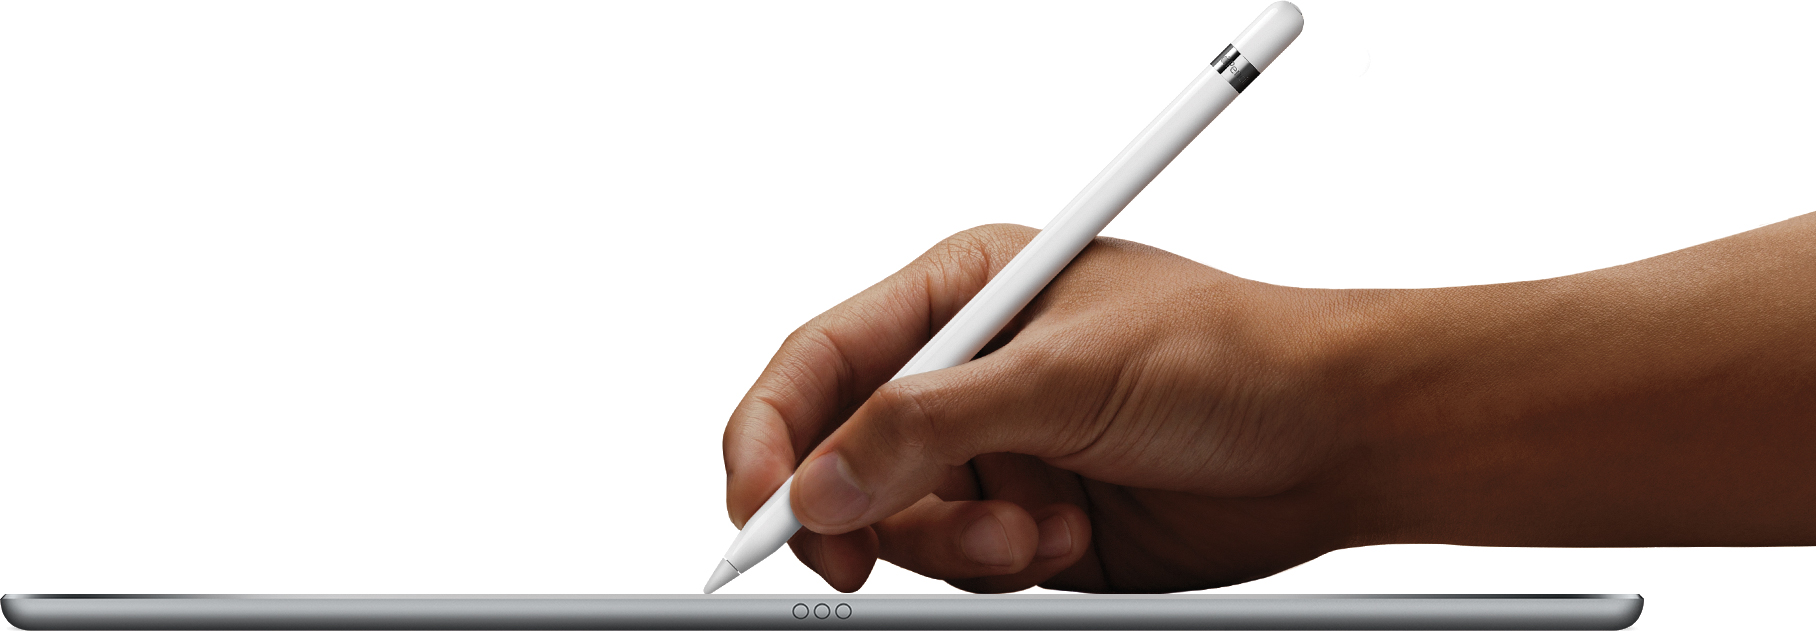 Apple would be considering launching an iPhone with Apple Pencil support in 2019